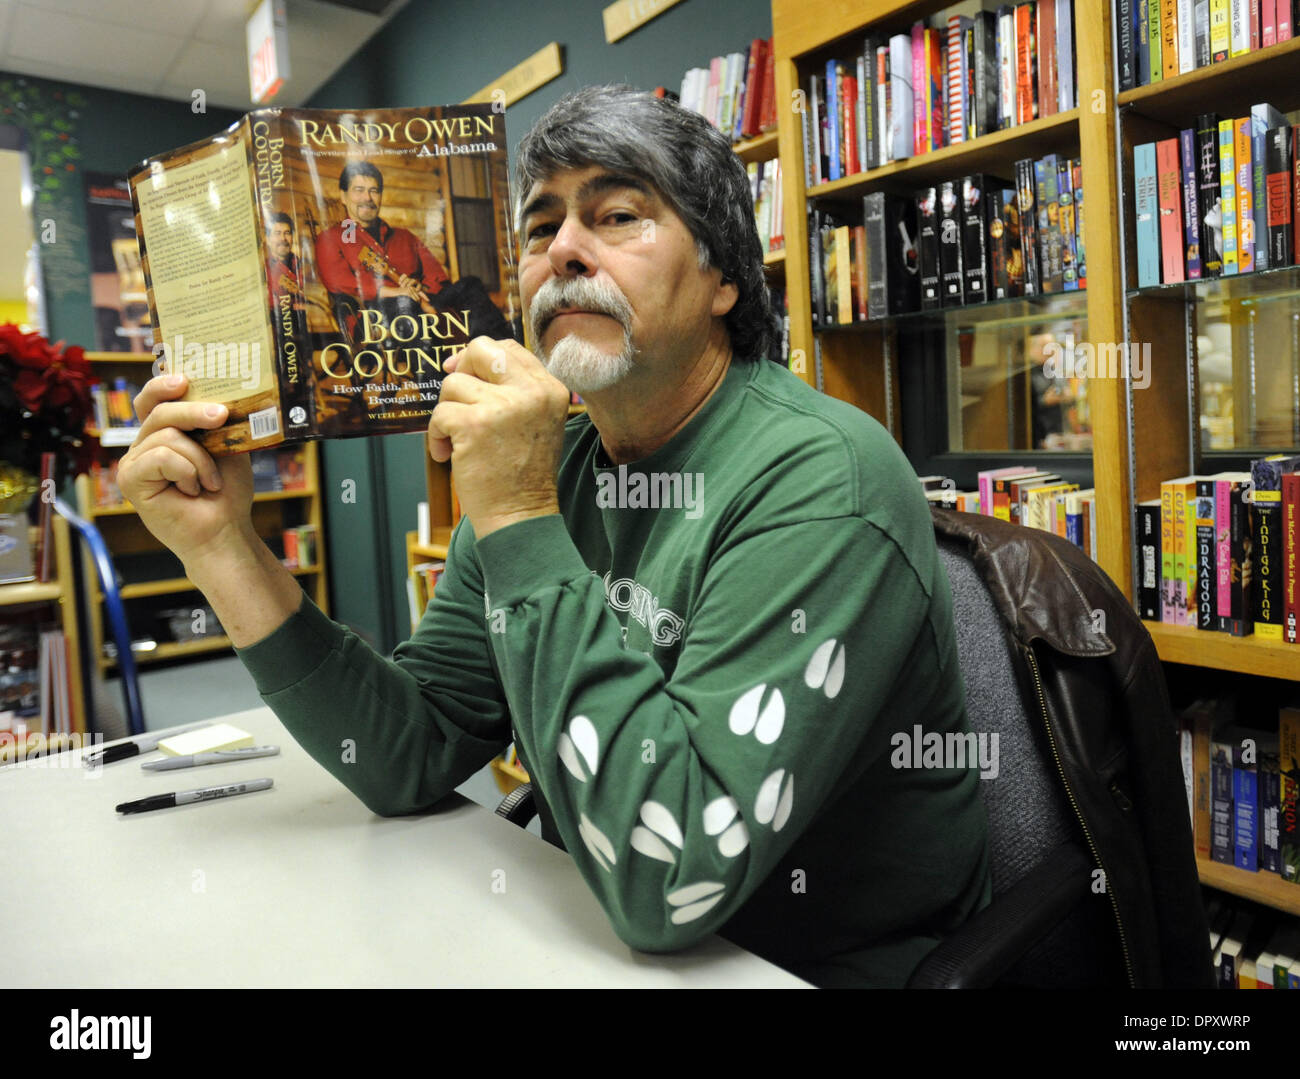 Dec 07, 2008 - Raleigh, North Carolina, USA - Singer RANDY OWEN, formerly of the band country music supergroup Alabama, signs copies of his new book 'Born Country' at Quail Ridge Books and Music. (Credit Image: © Jason Moore/ZUMA Press) Stock Photo